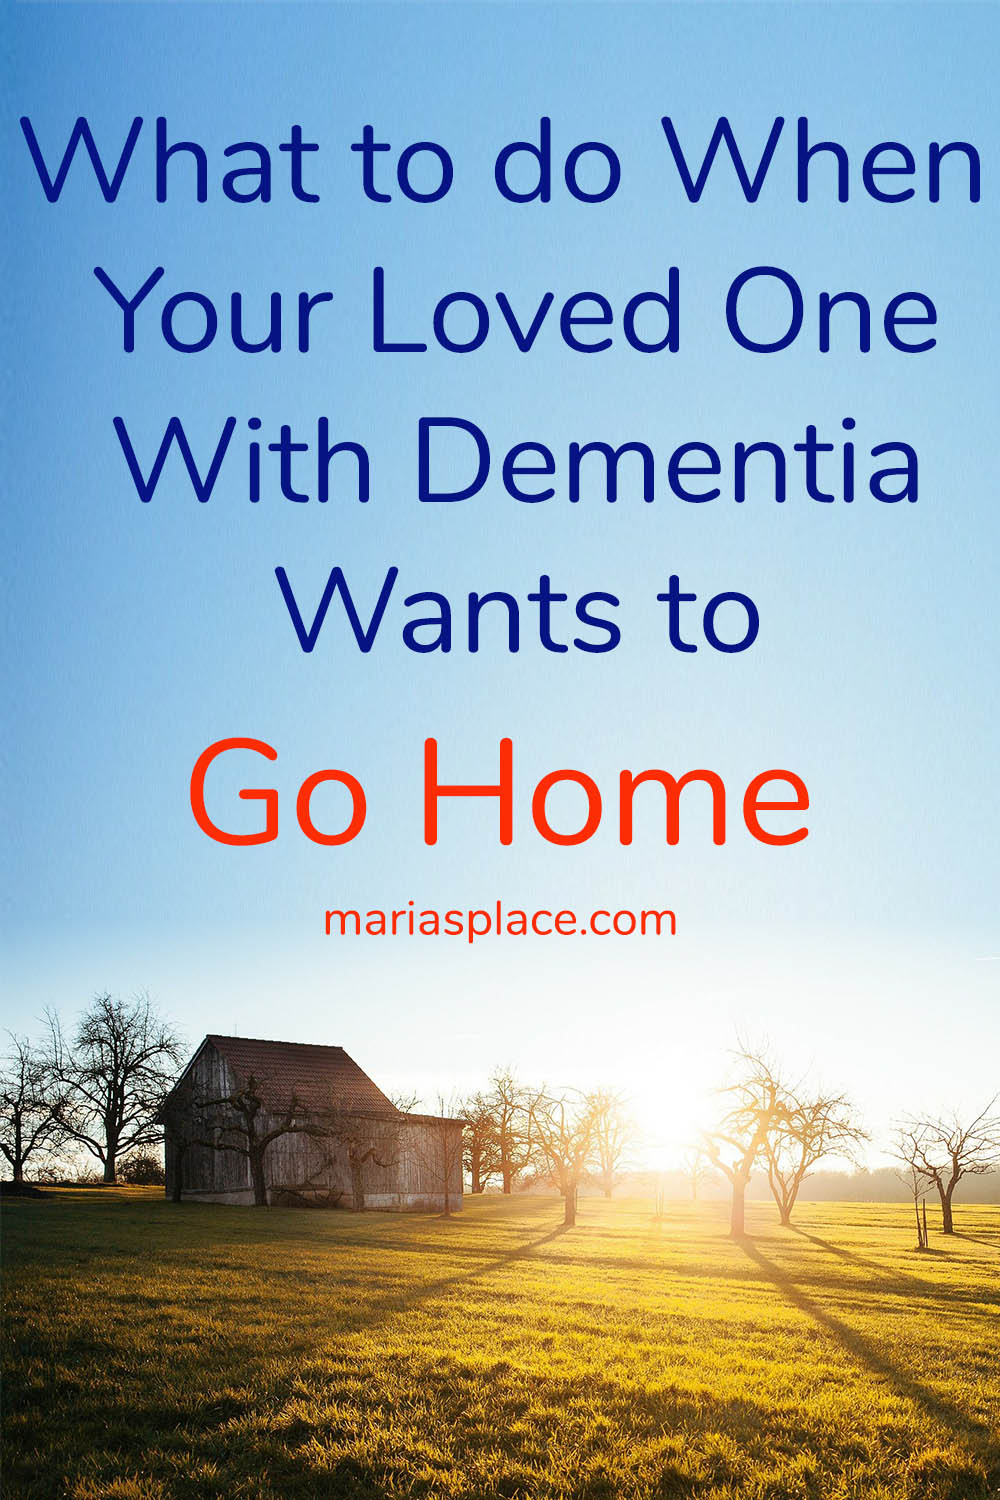 Dementia and Wanting to “Go Home”